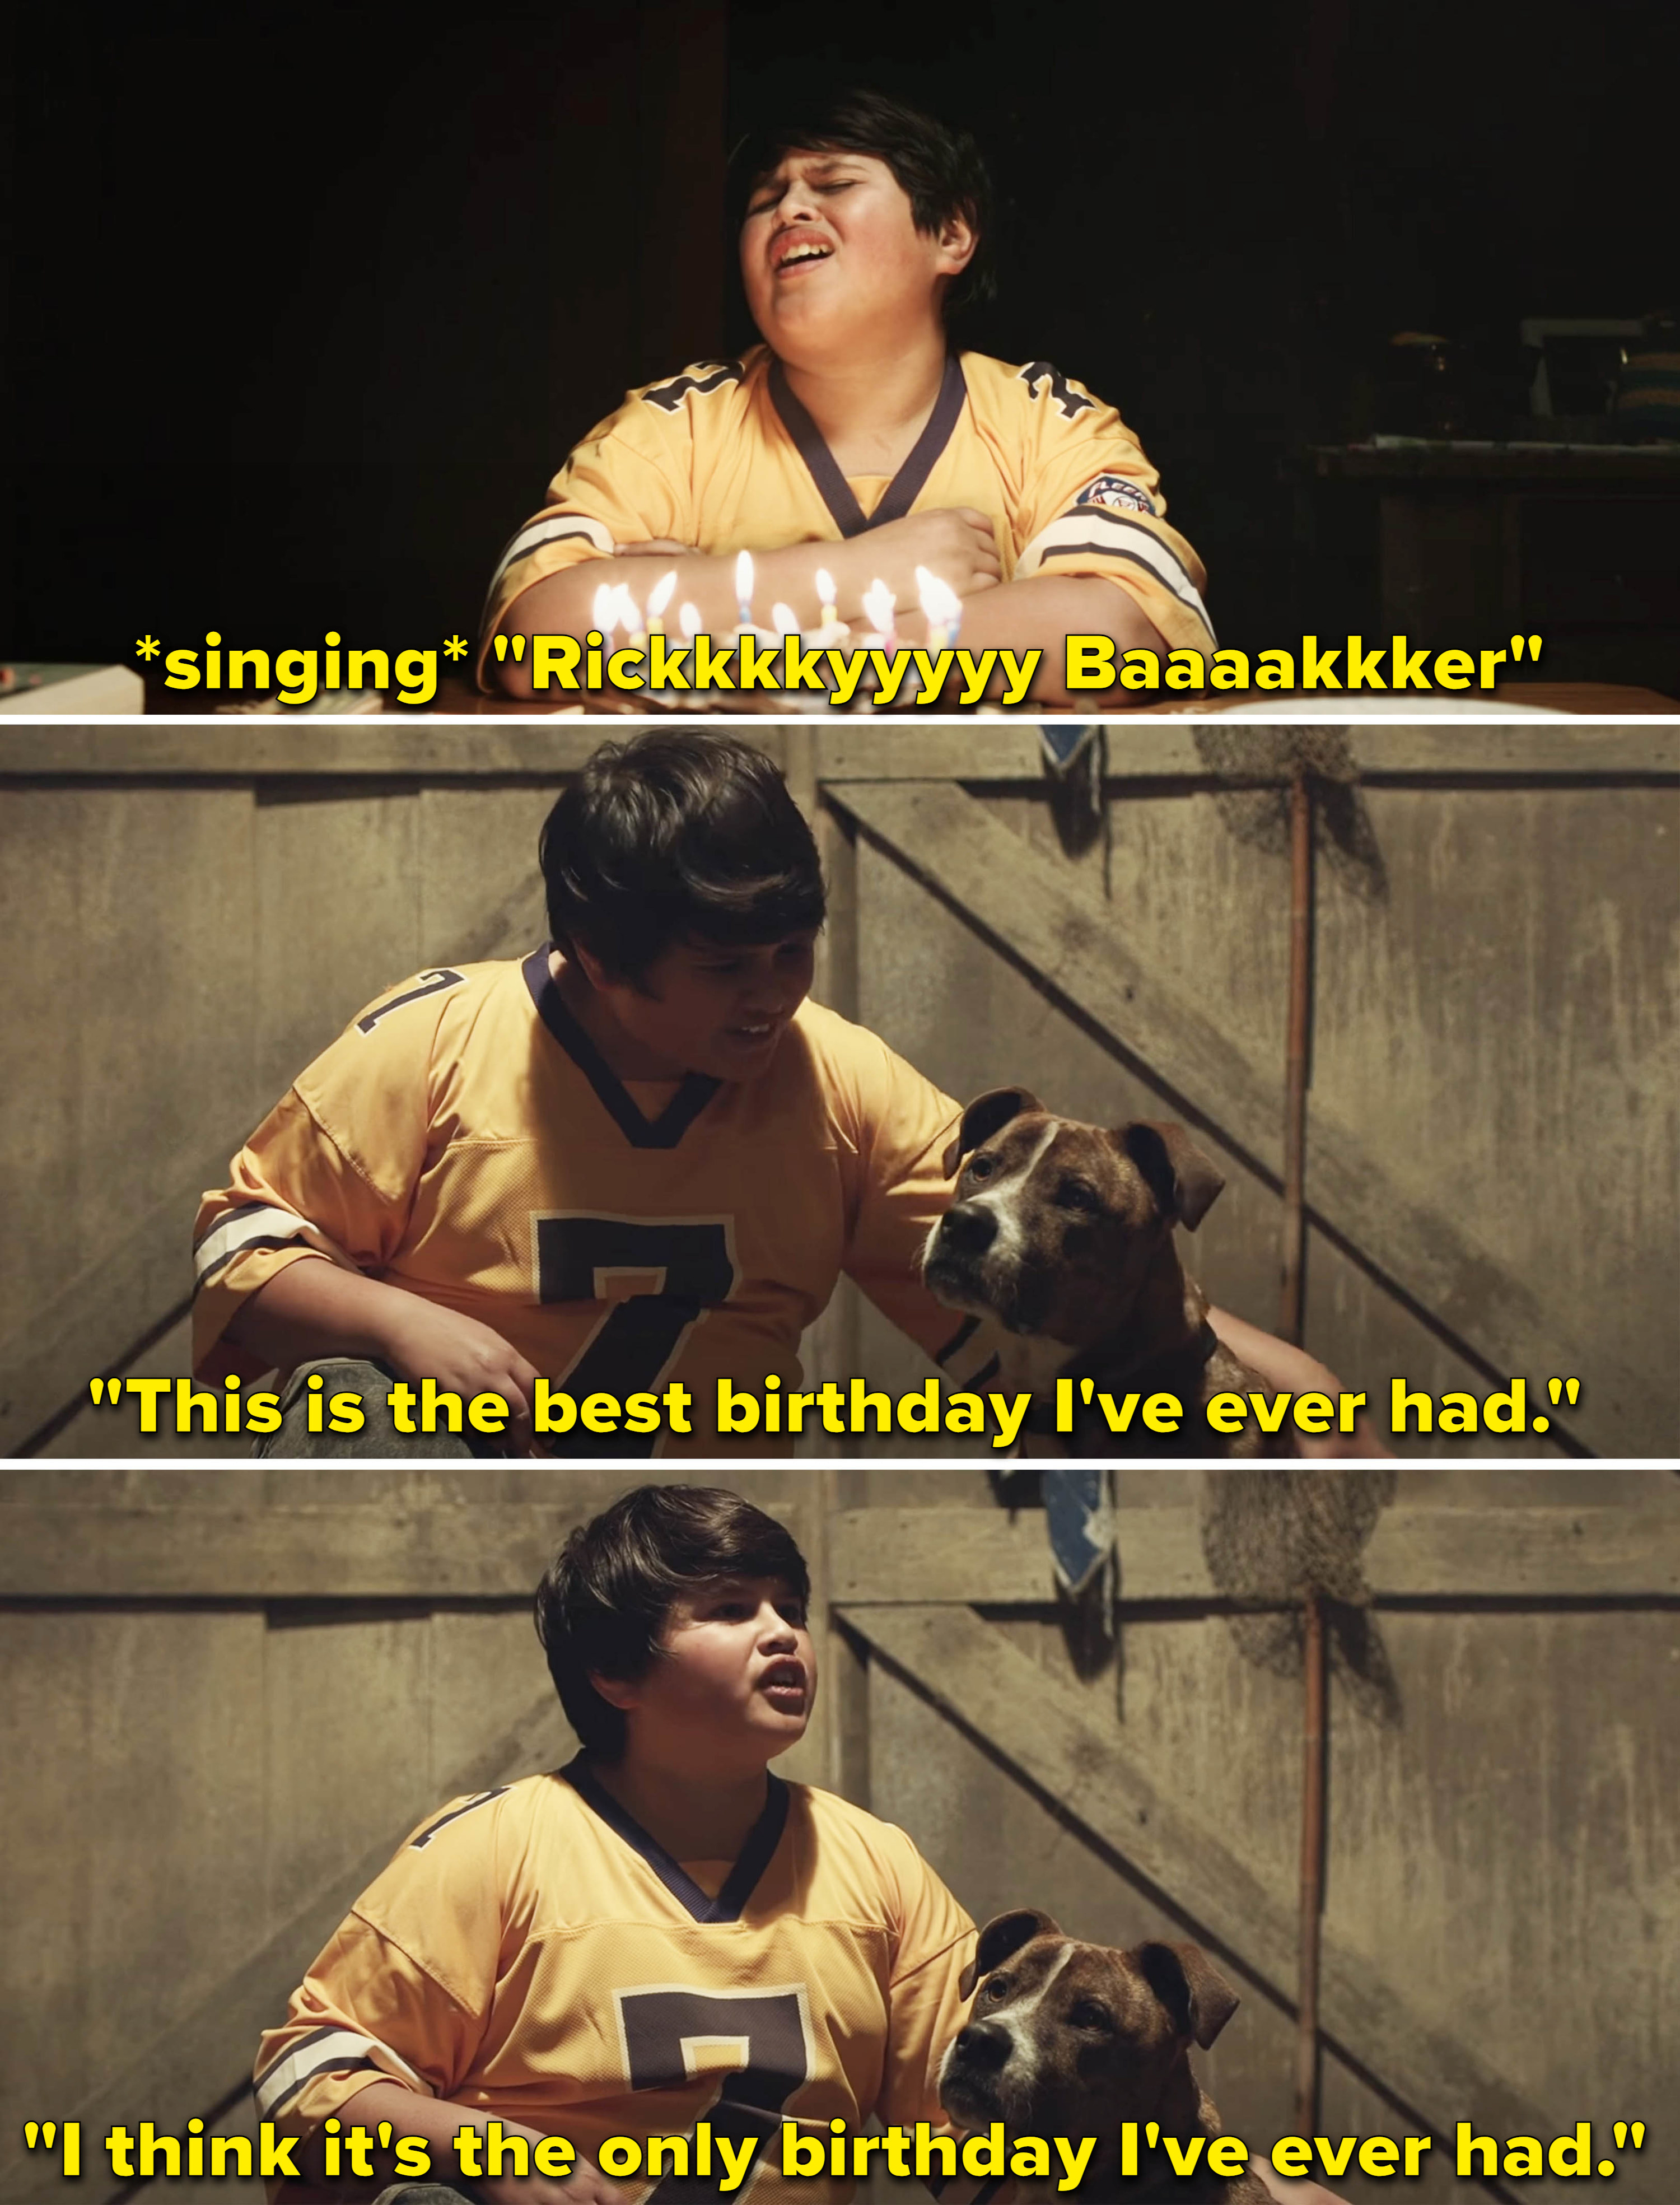 Ricky singing and saying &quot;This is the best birthday I&#x27;ve ever had; I think it&#x27;s the only birthday I&#x27;ve ever had&quot;